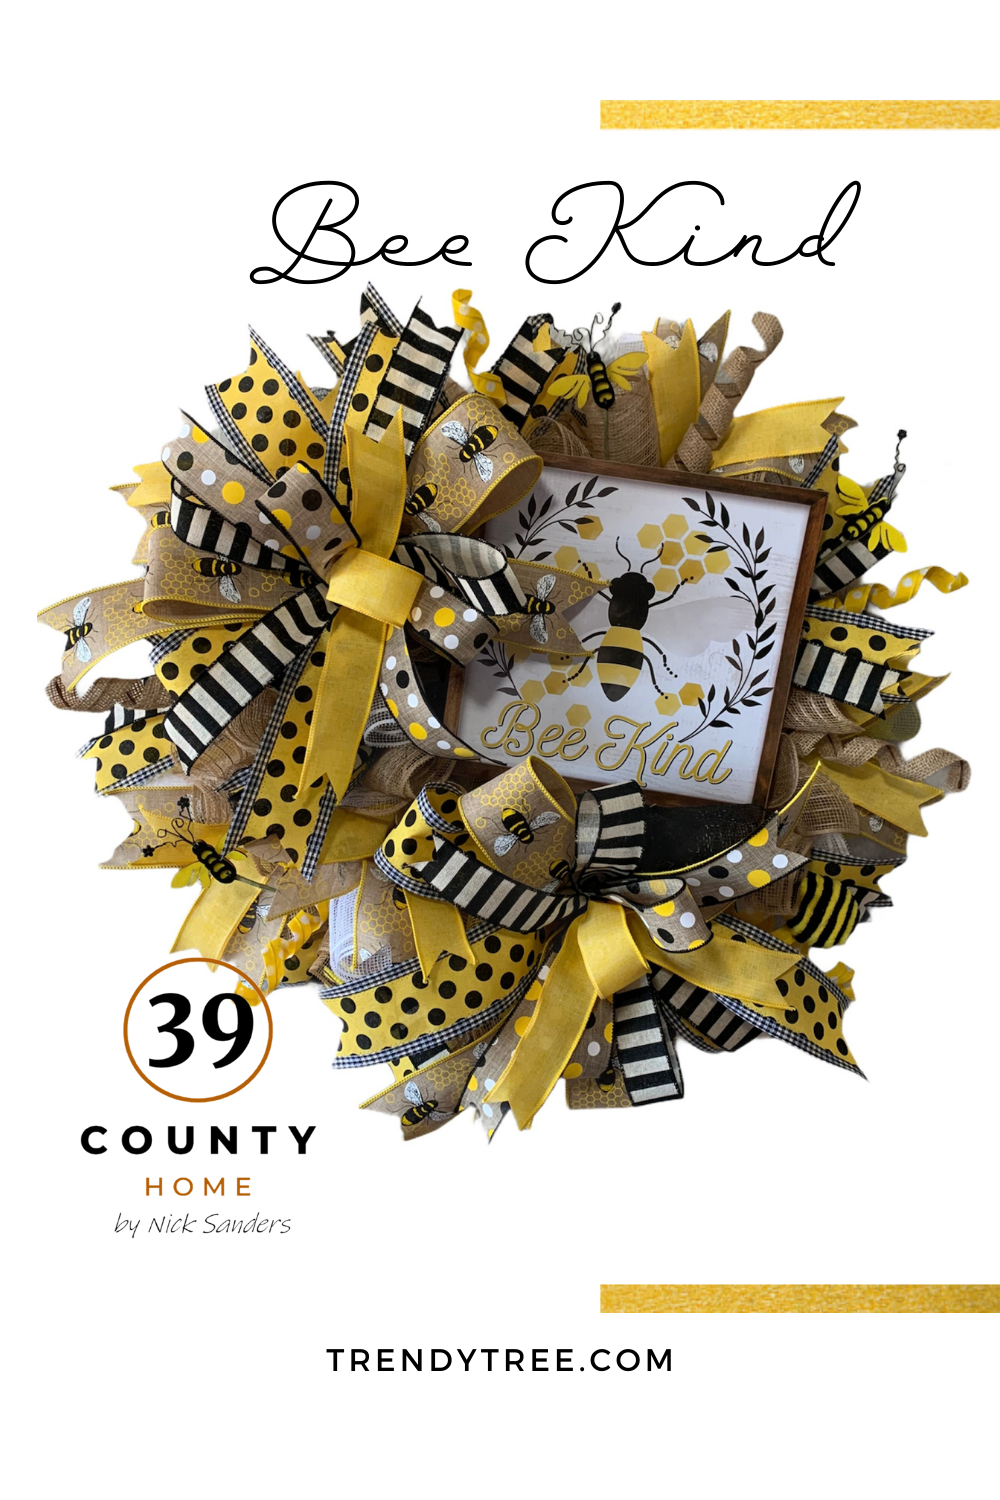 Bee Kind Summer Wreath created by Nick Sanders of 39 County Home